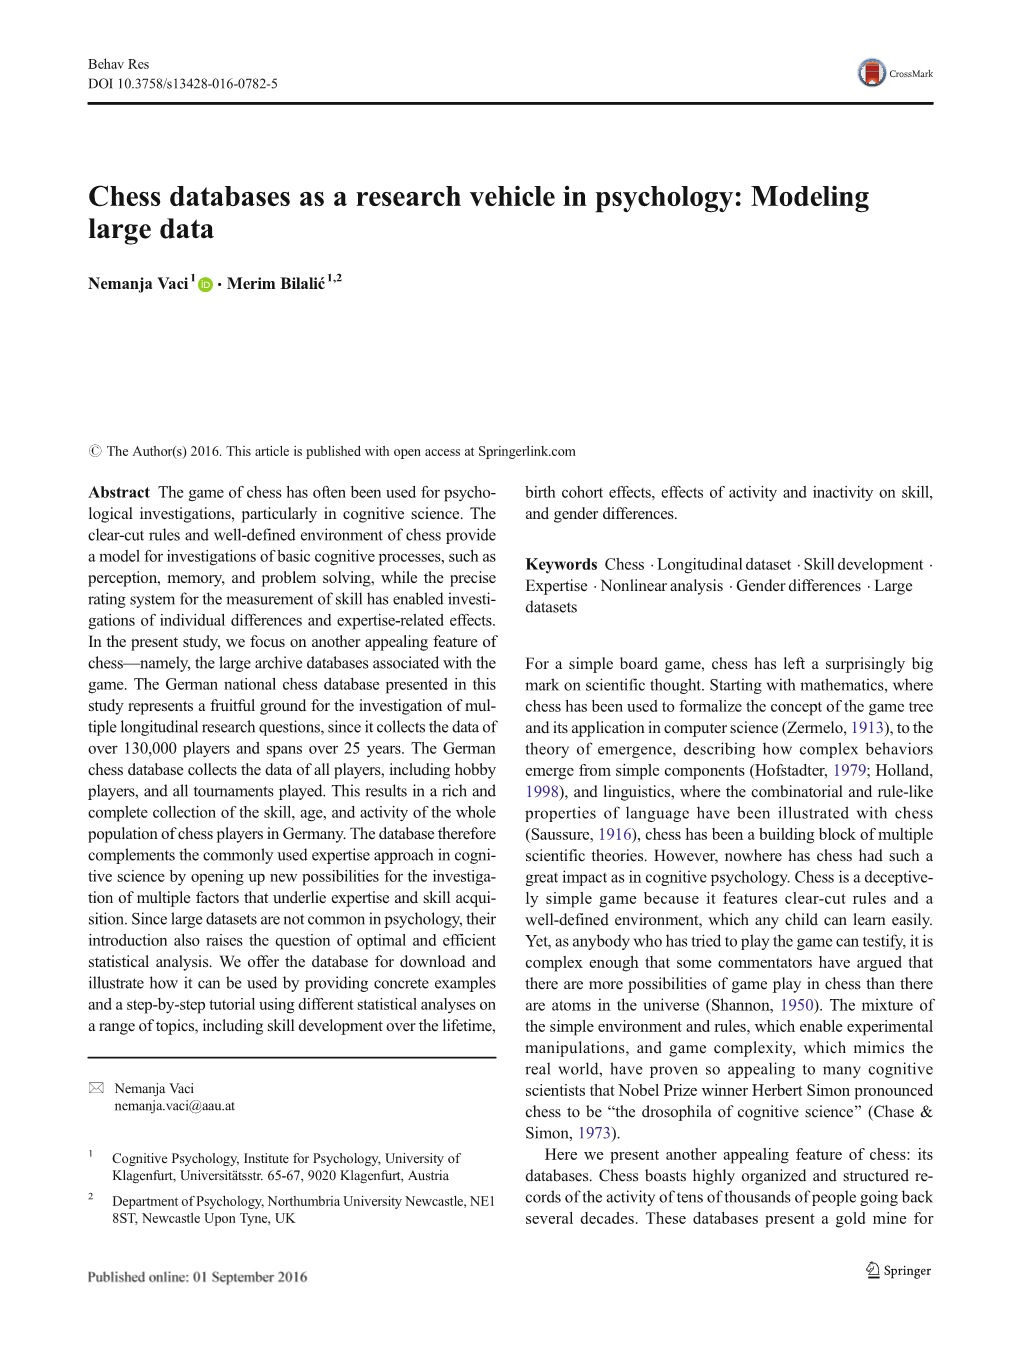 Chess Databases As a Research Vehicle in Psychology: Modeling Large Data